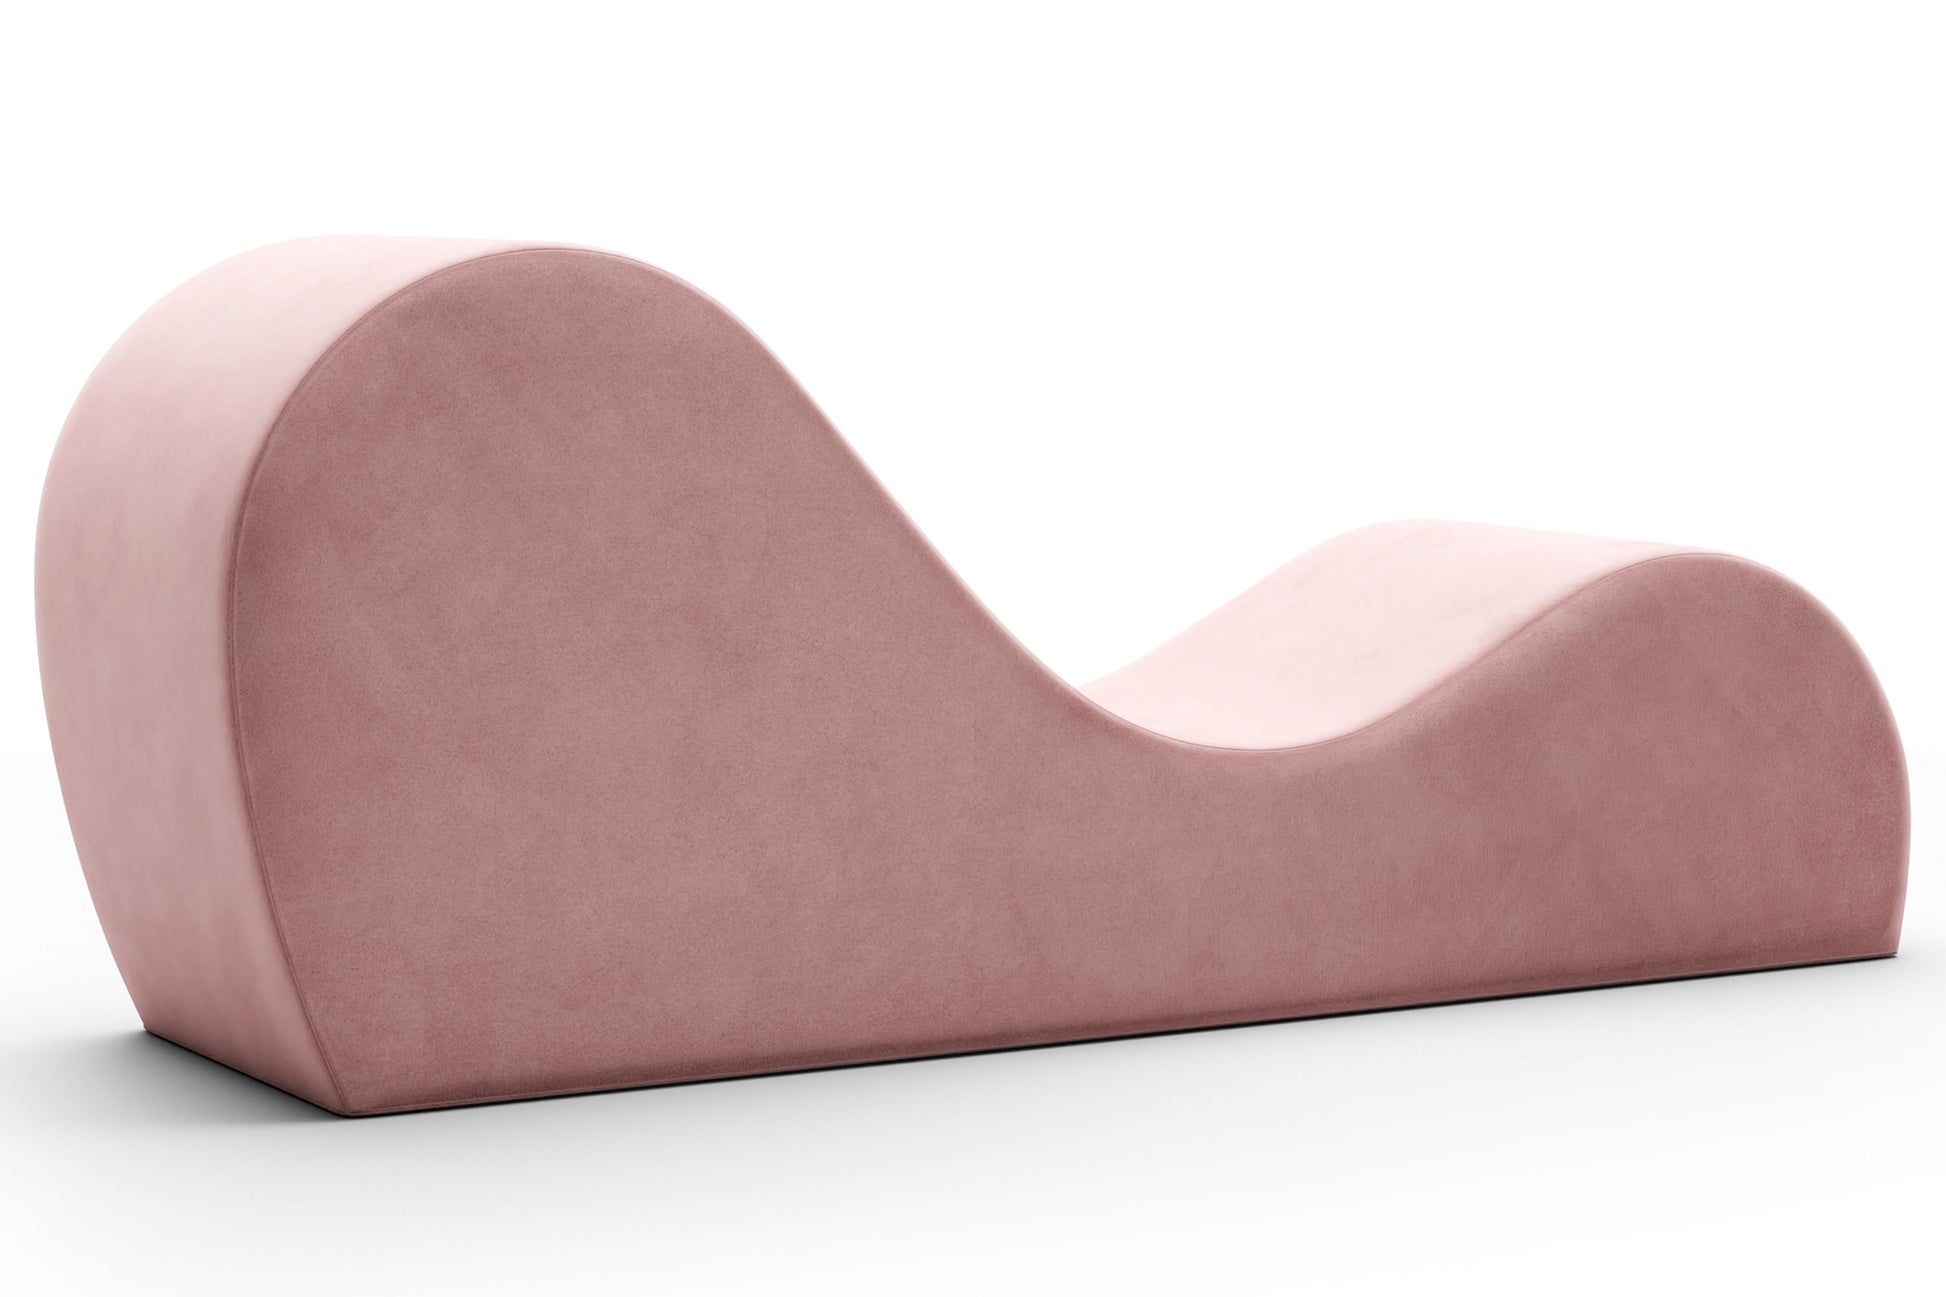 The Cello Chaise by Liberator